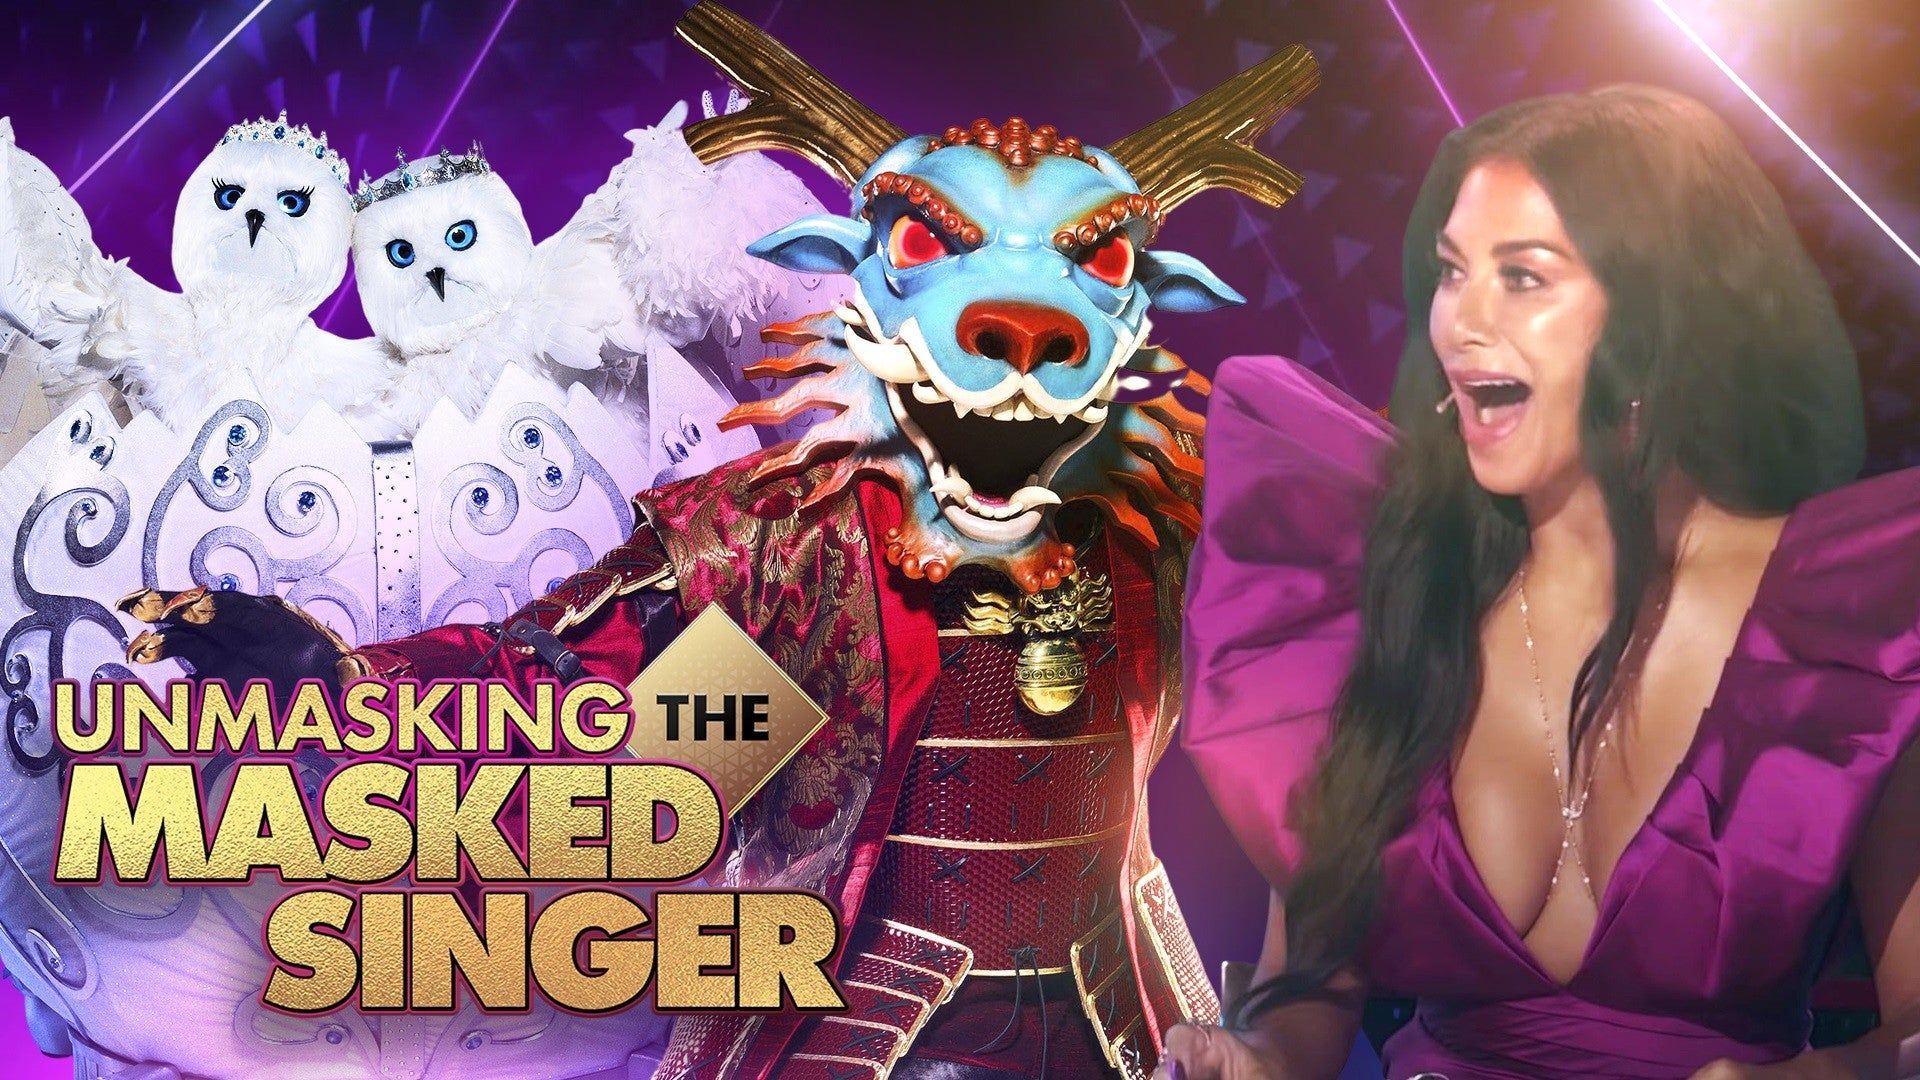 The Masked Singer': Season 4 Clues, Spoilers and Our Best Guesses at Secret Identities